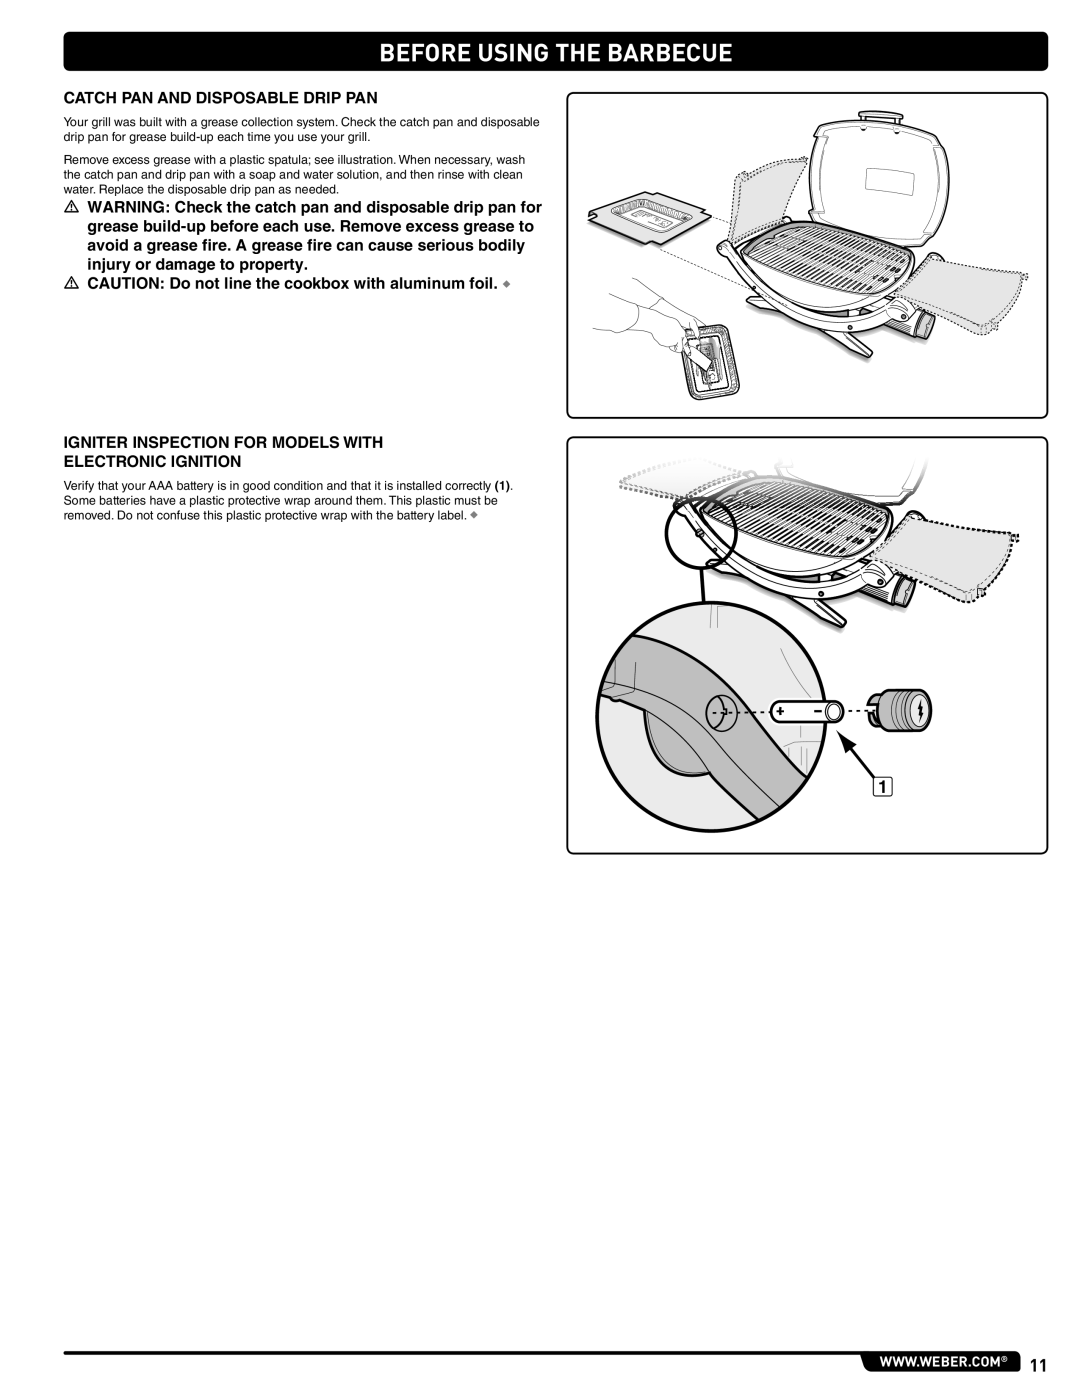 Weber 827020, 100, LP GAS GRILL, 220, 200, 120 instruction manual Before Using The Barbecue 